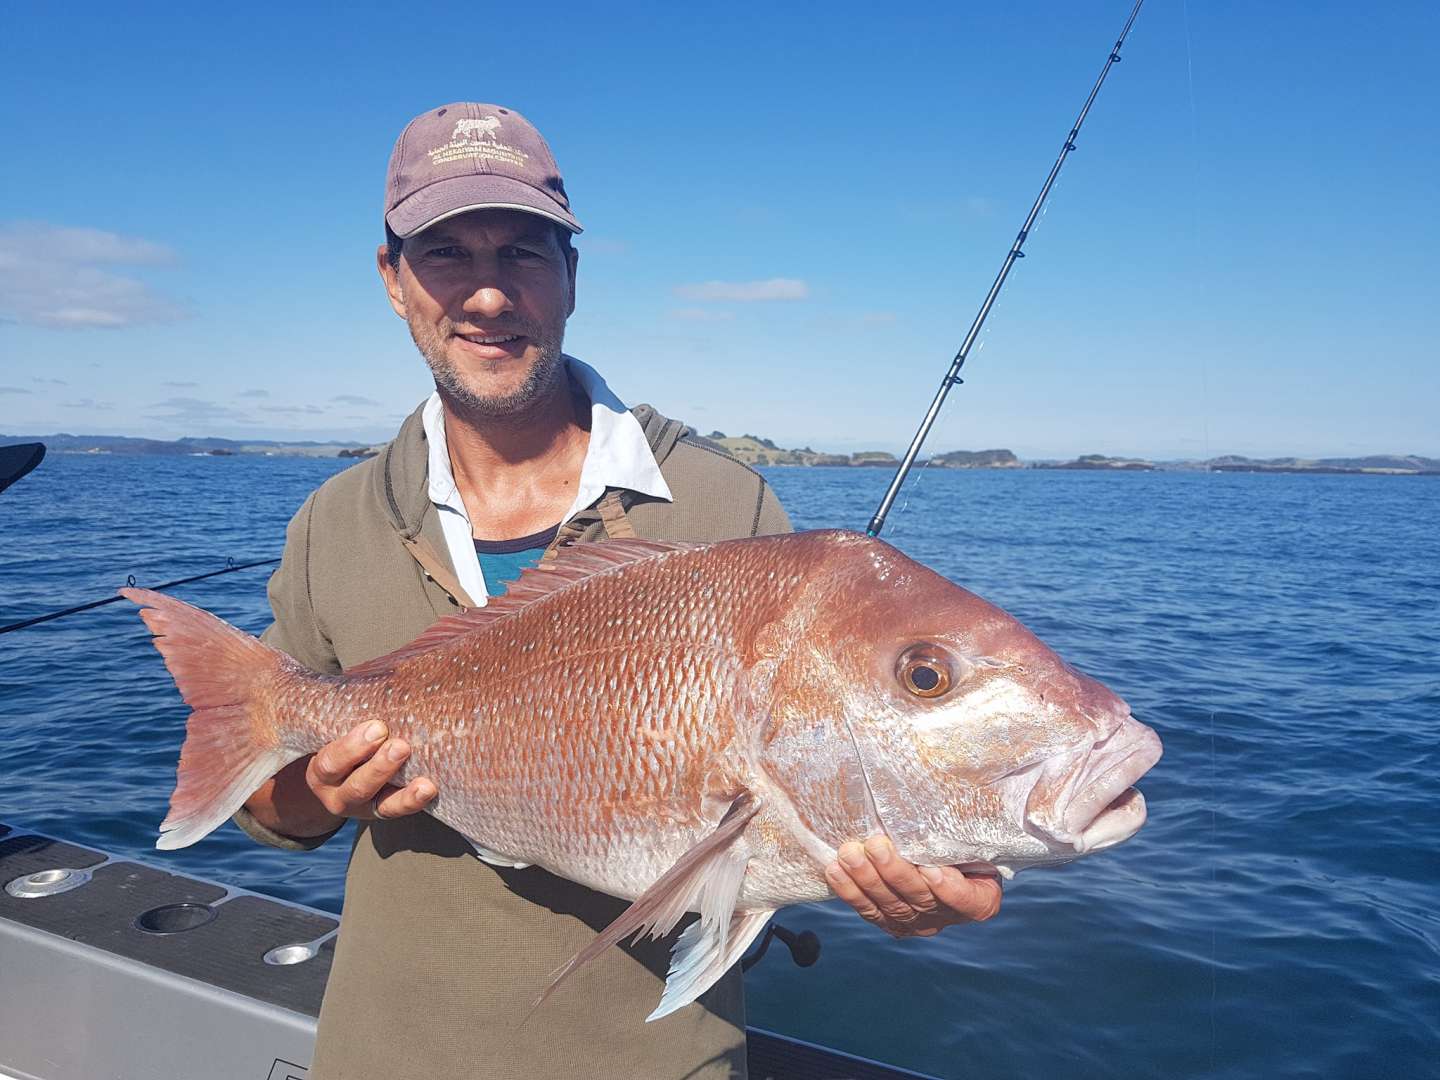 Snapper Extreme Fishing in the Bay of Islands